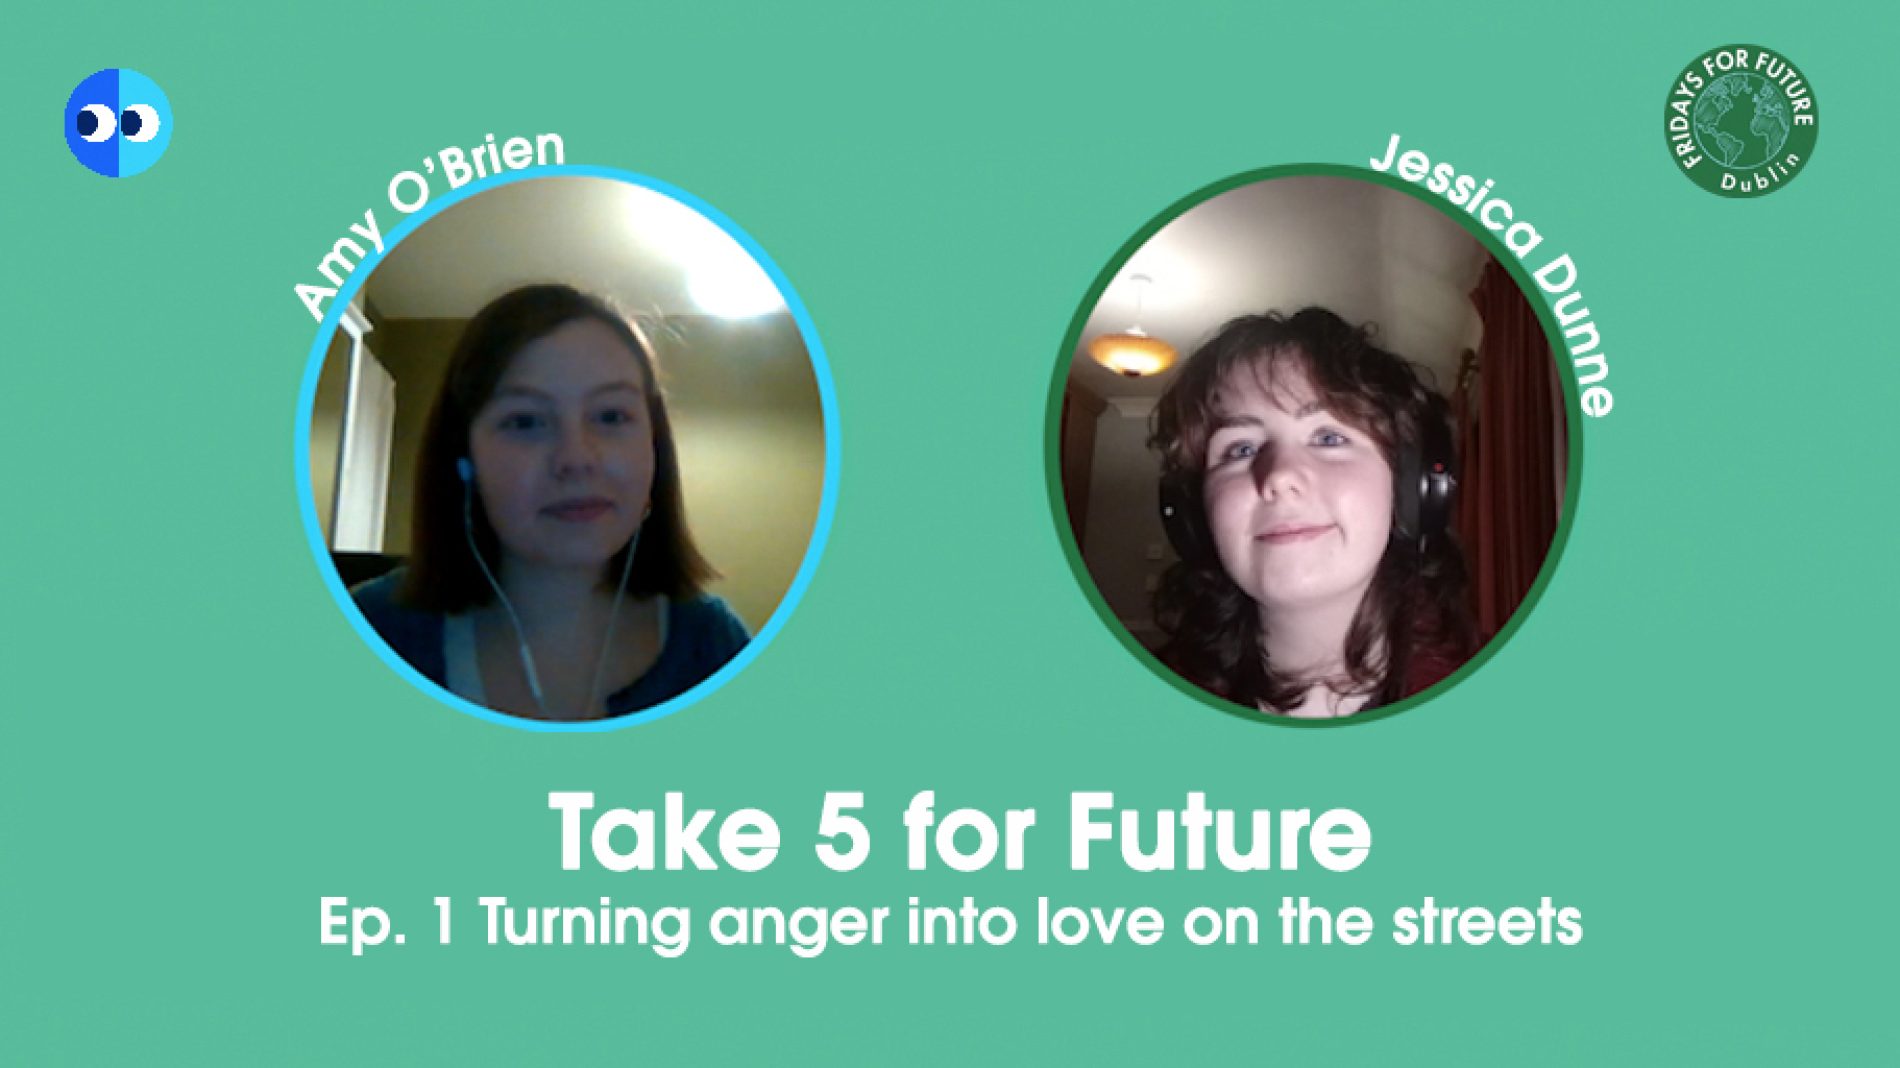 photos of two young people against a green background text reads 'take 5 for Future episode 1 turning anger into love on the streets